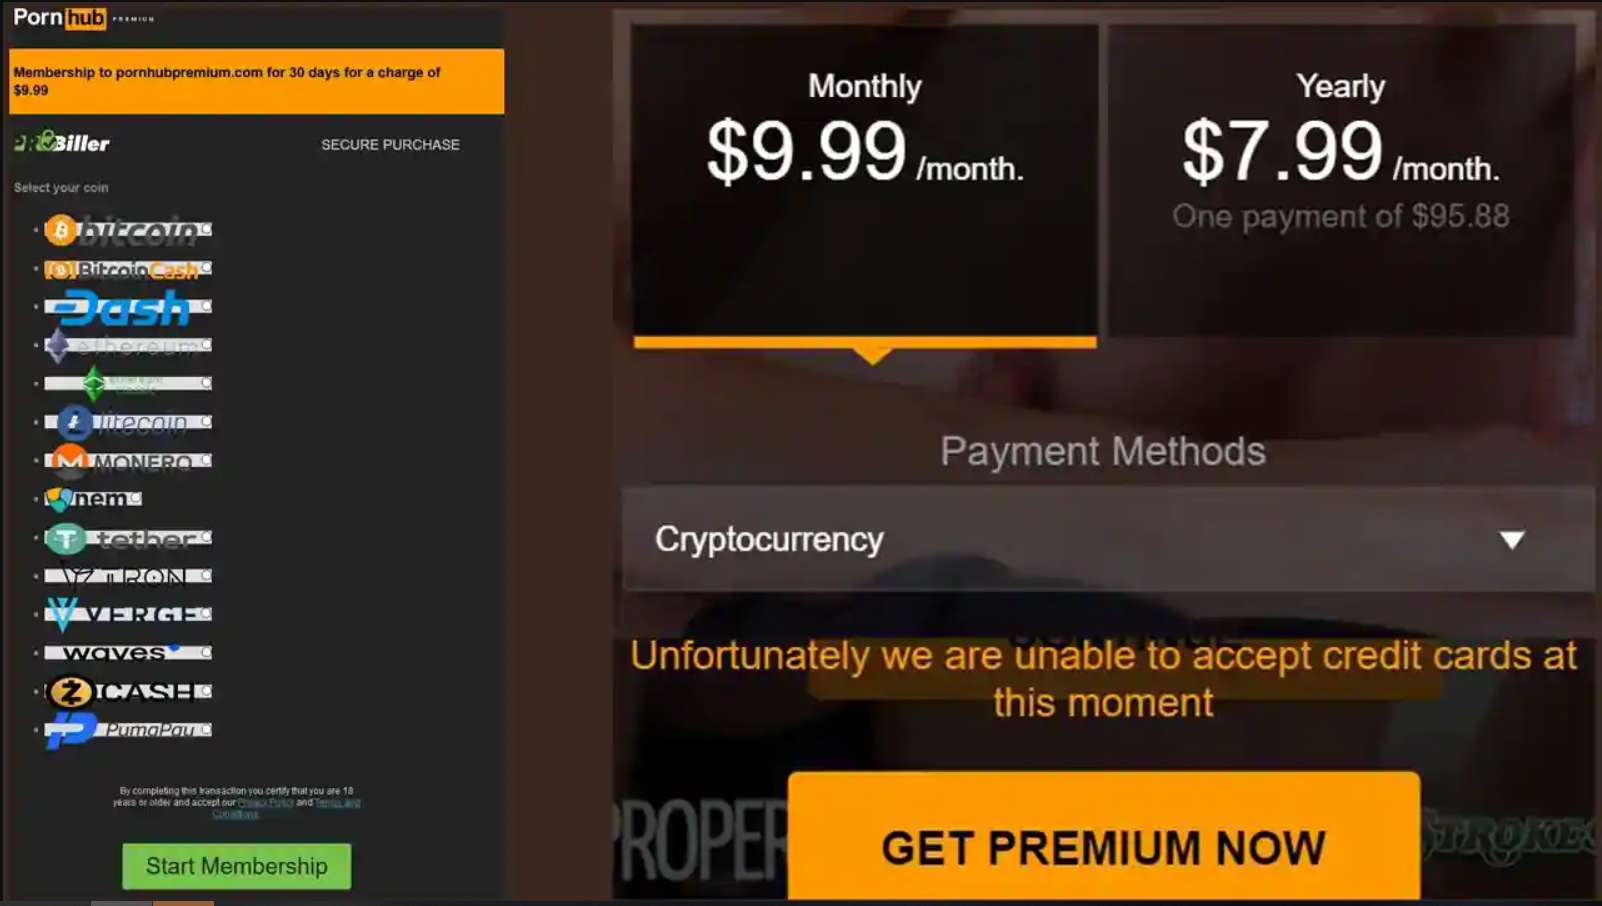 how to pay pornhub with crypto , how to use pornhub safely